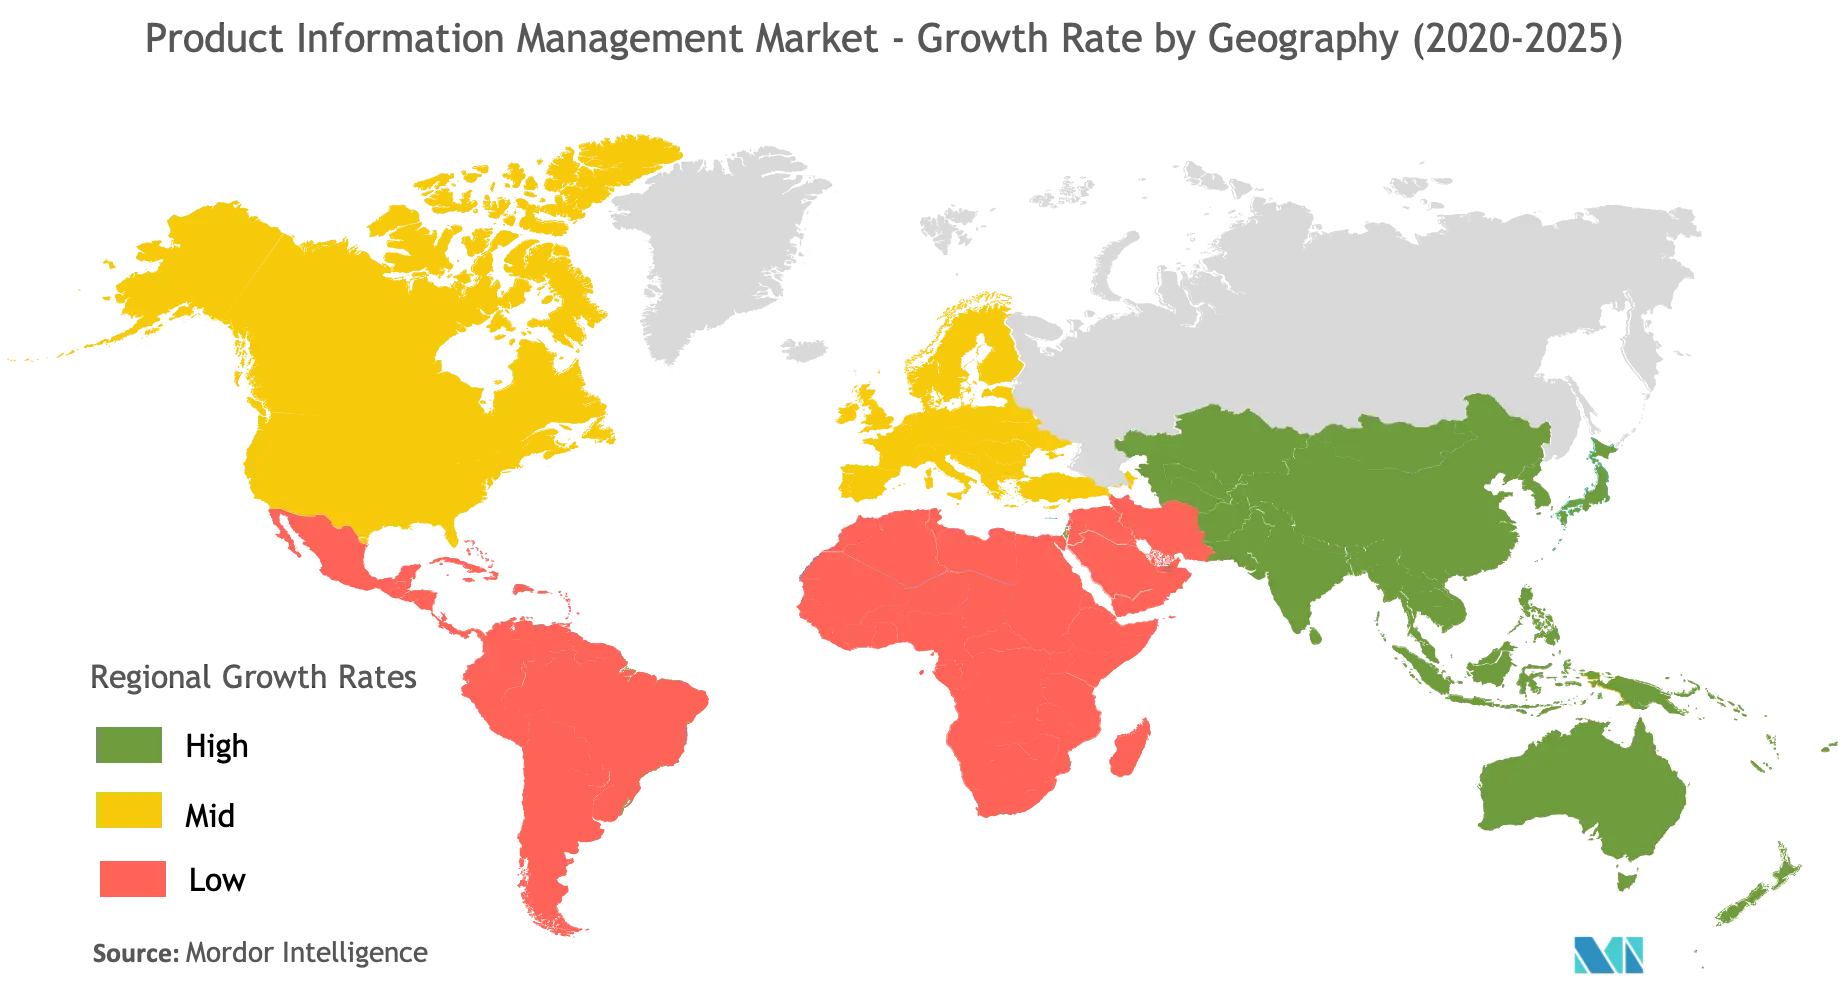 Product Information Management Market Growth by Region